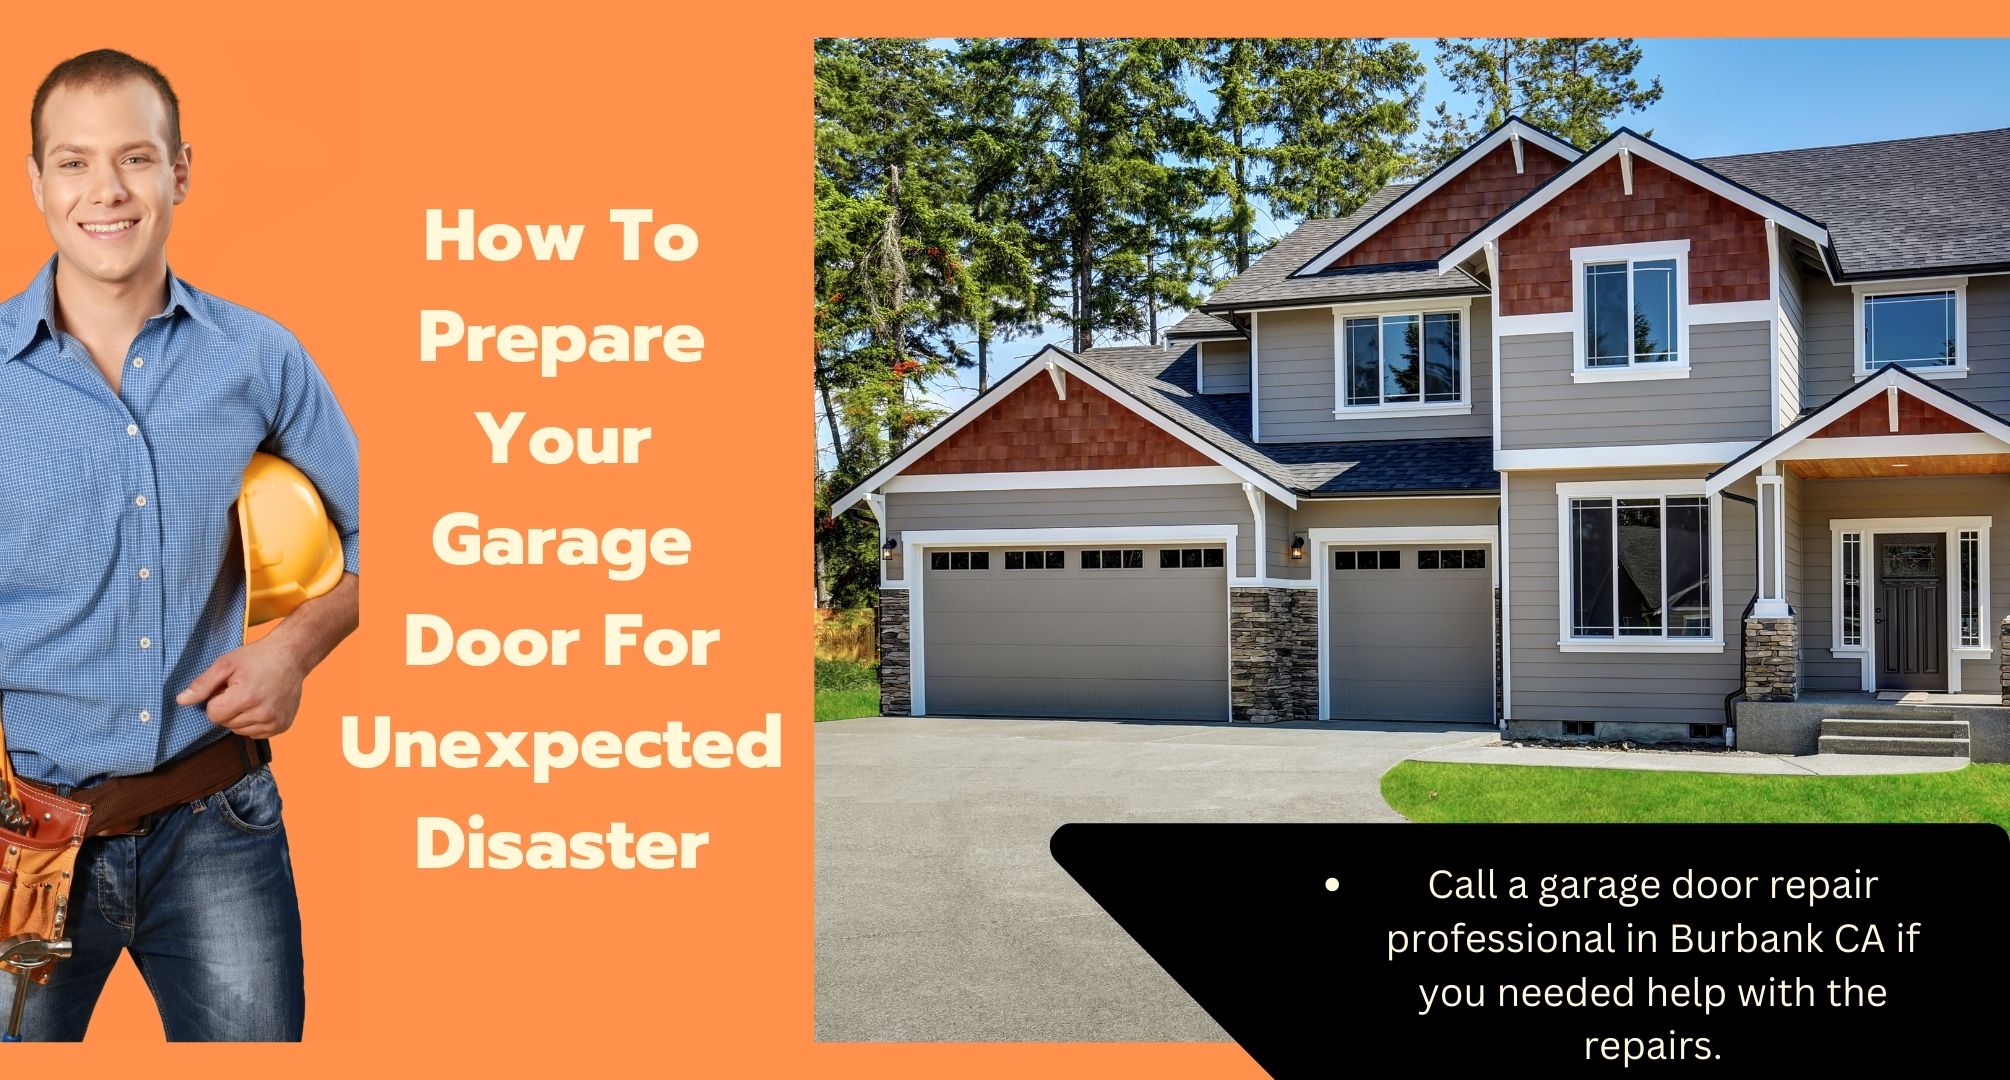 How to prepare your garage door for unexpected disaster